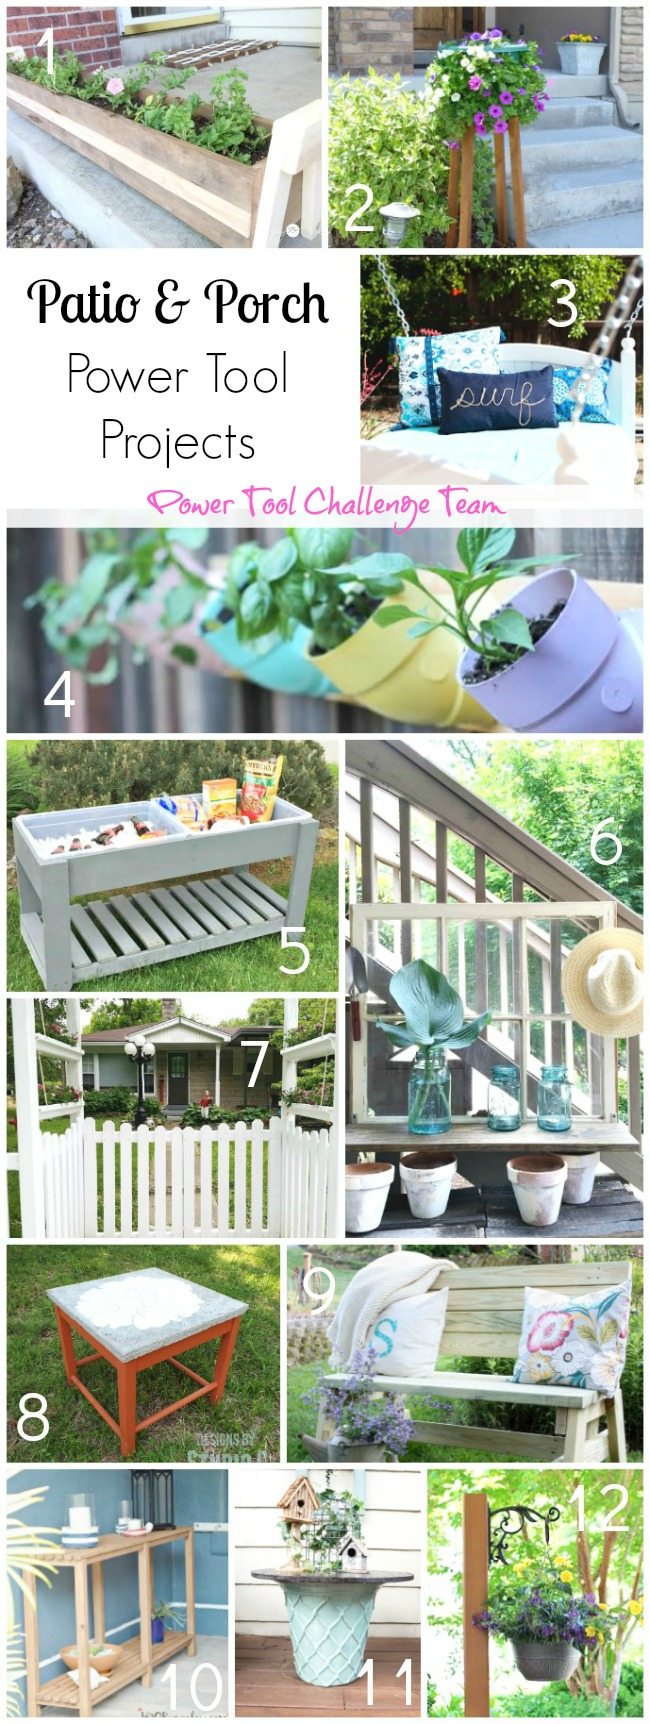 Patio and Porch Power Tool Projects from The Power Tool Challenge Team